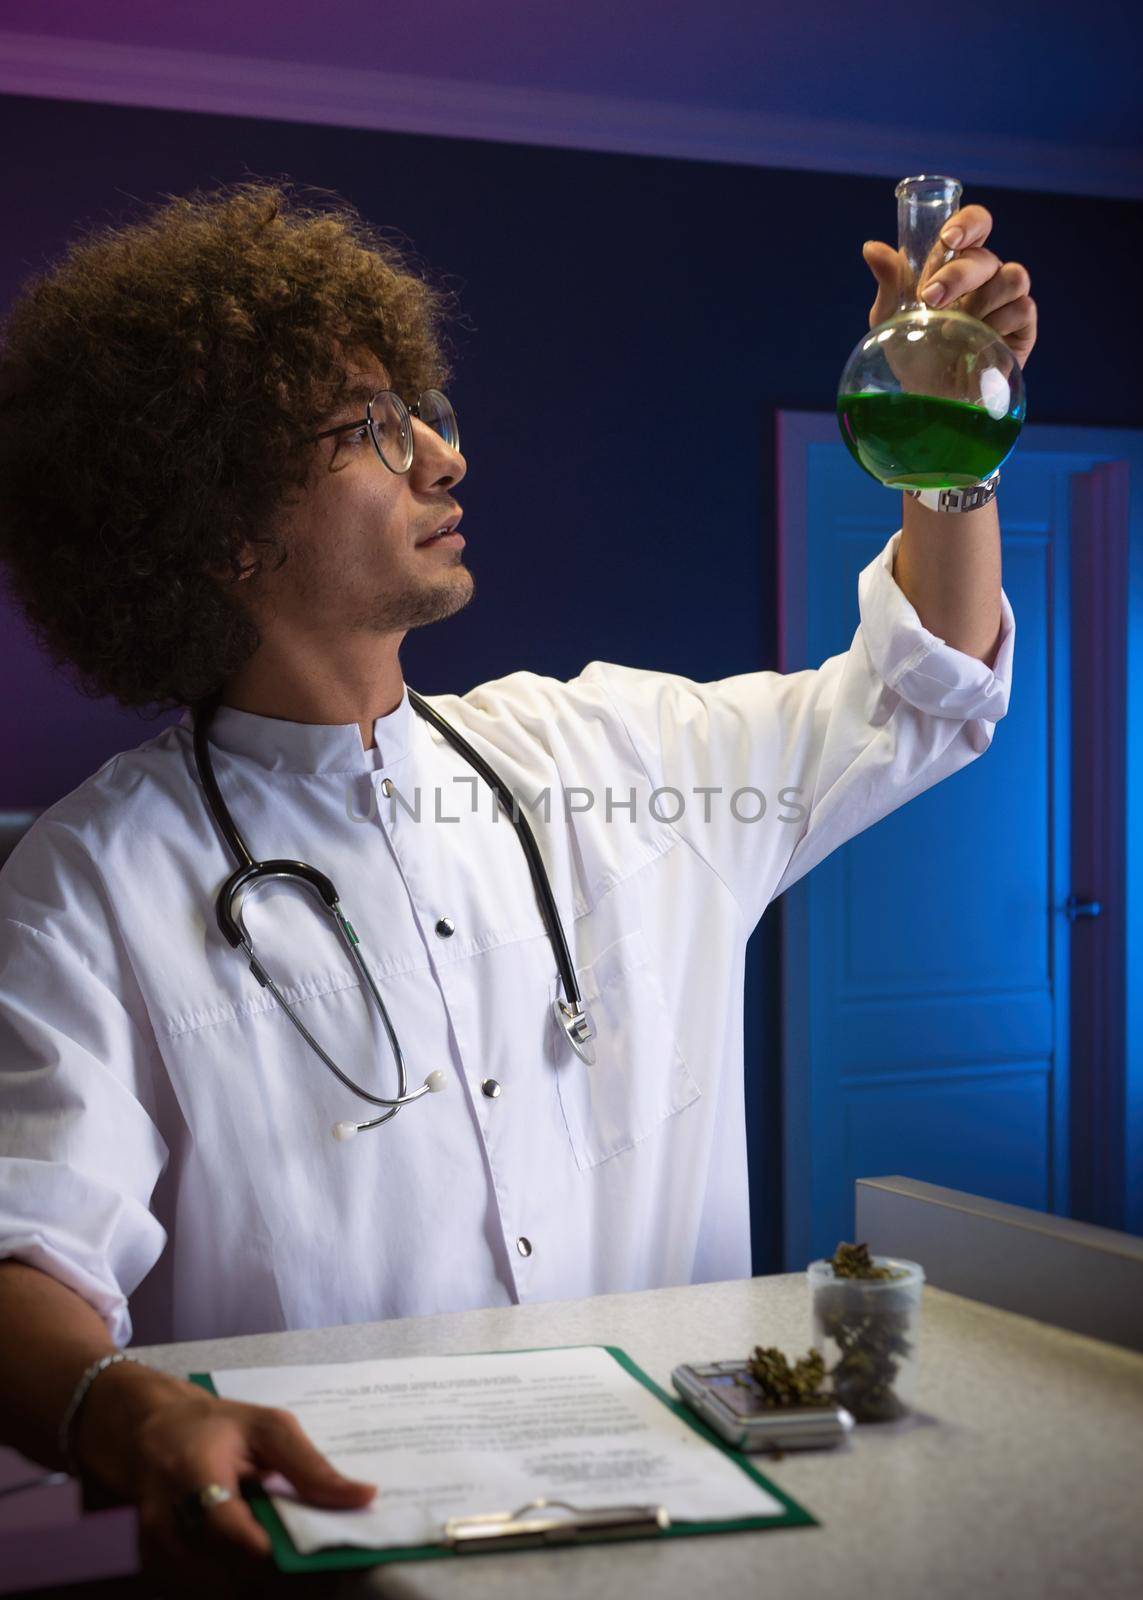 an Arab student with an Afro hairstyle in a doctor's suit is engaged in cannabis research by Rotozey